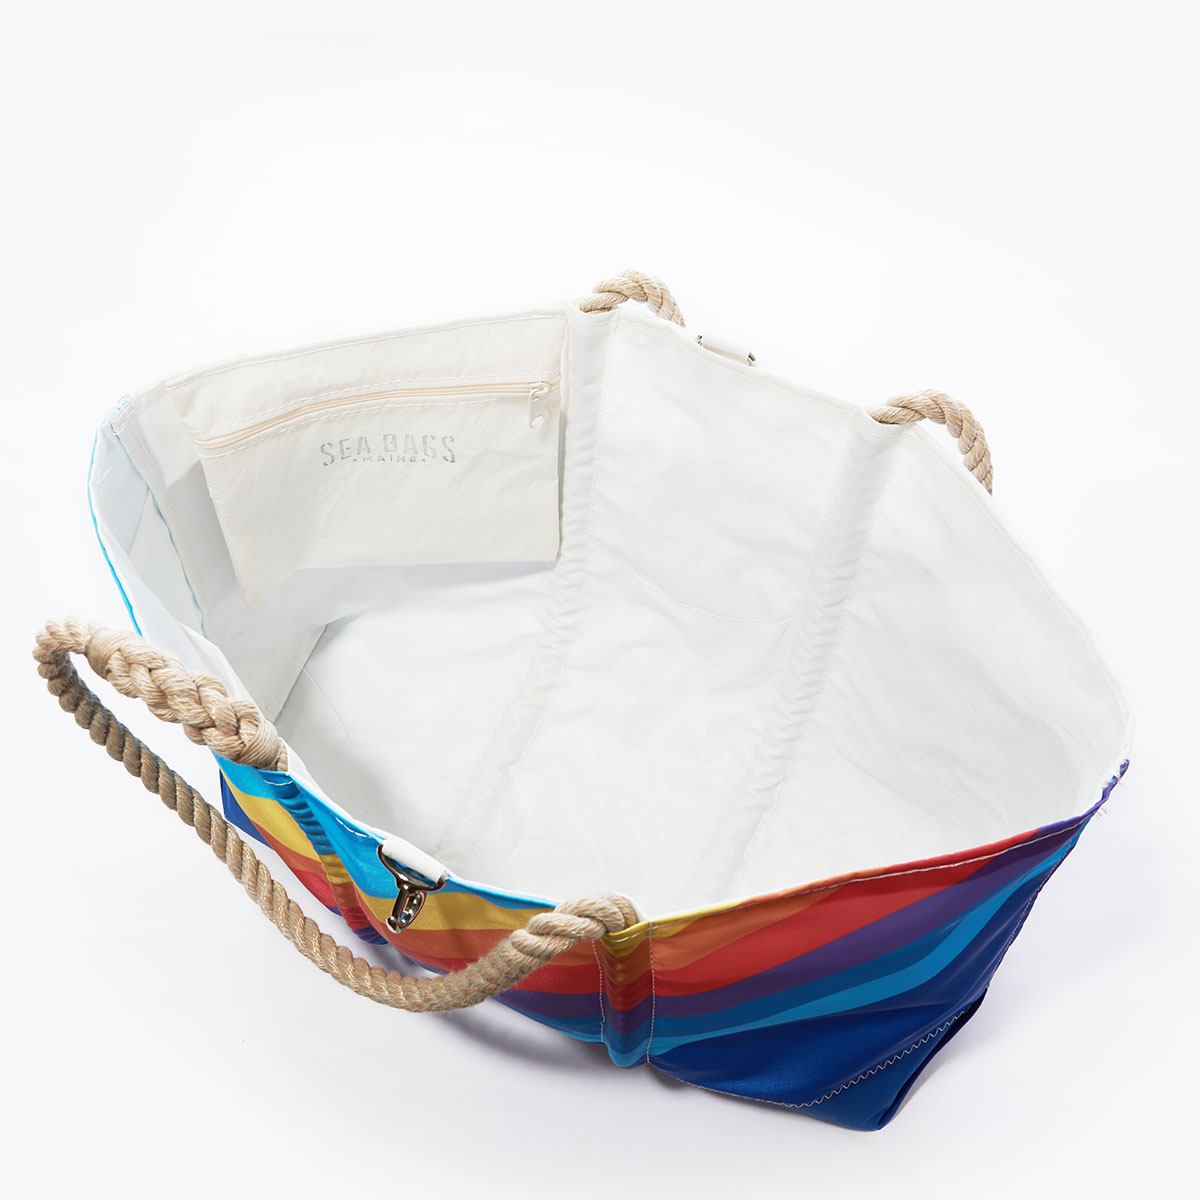 inside view showing hanging interior zipper pocket of a recycled sail cloth ogunquit beach tote which is printed with retro stripes that range from light blue in the top left corner to dark blue in the bottom right corner, with rainbow colored stripes in between